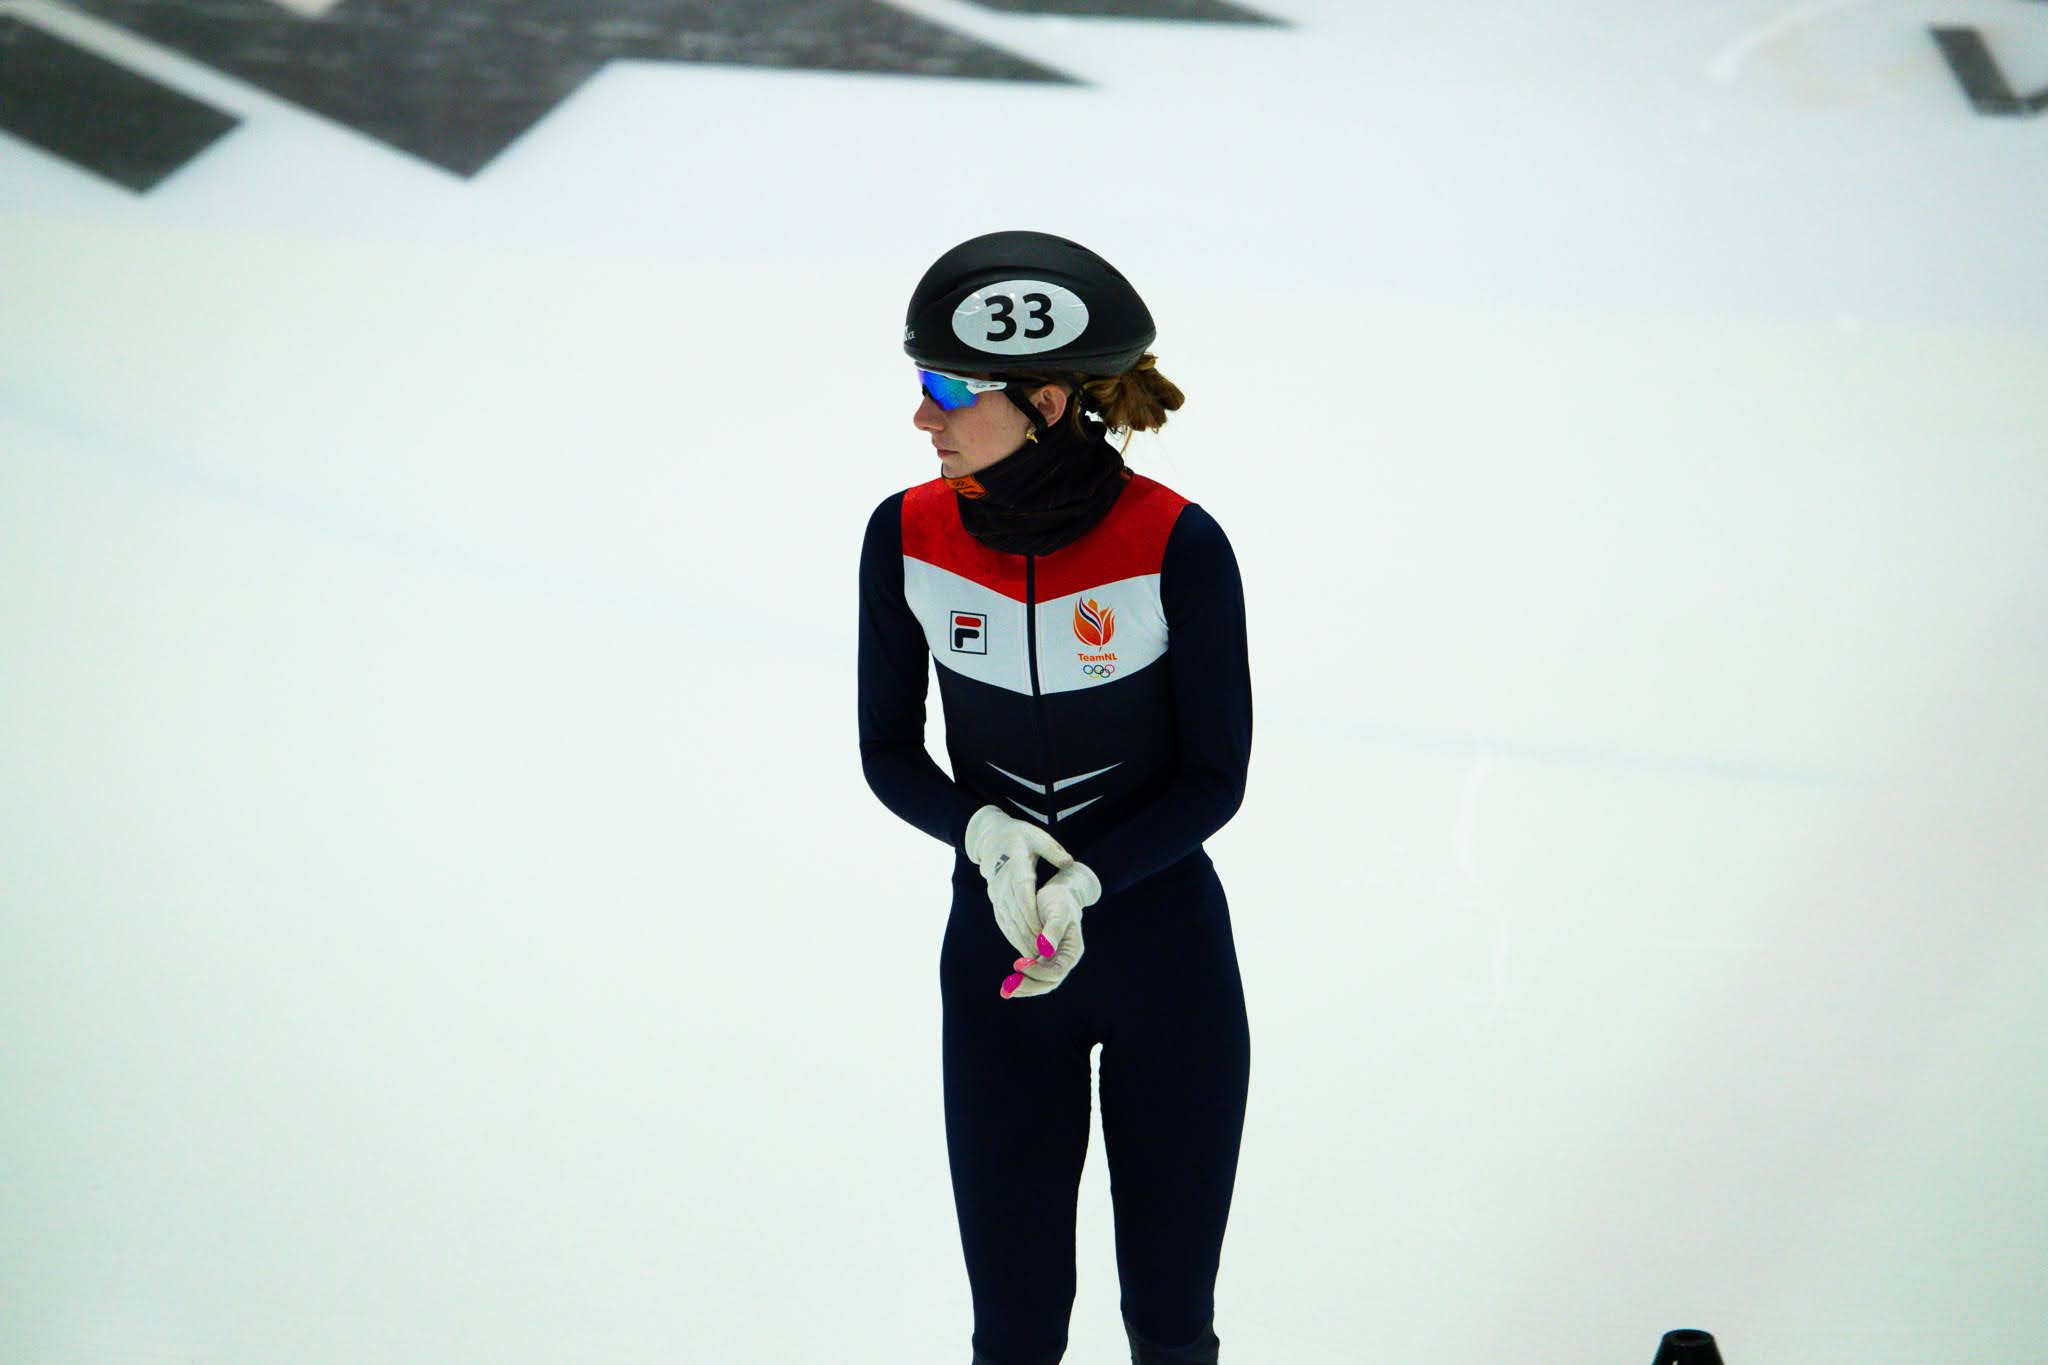 Zoe Deltrap of The Netherlands won her second gold of the Winter EYOF in the girls' 1,500m short track ©EYOF 2022 Vuokatti